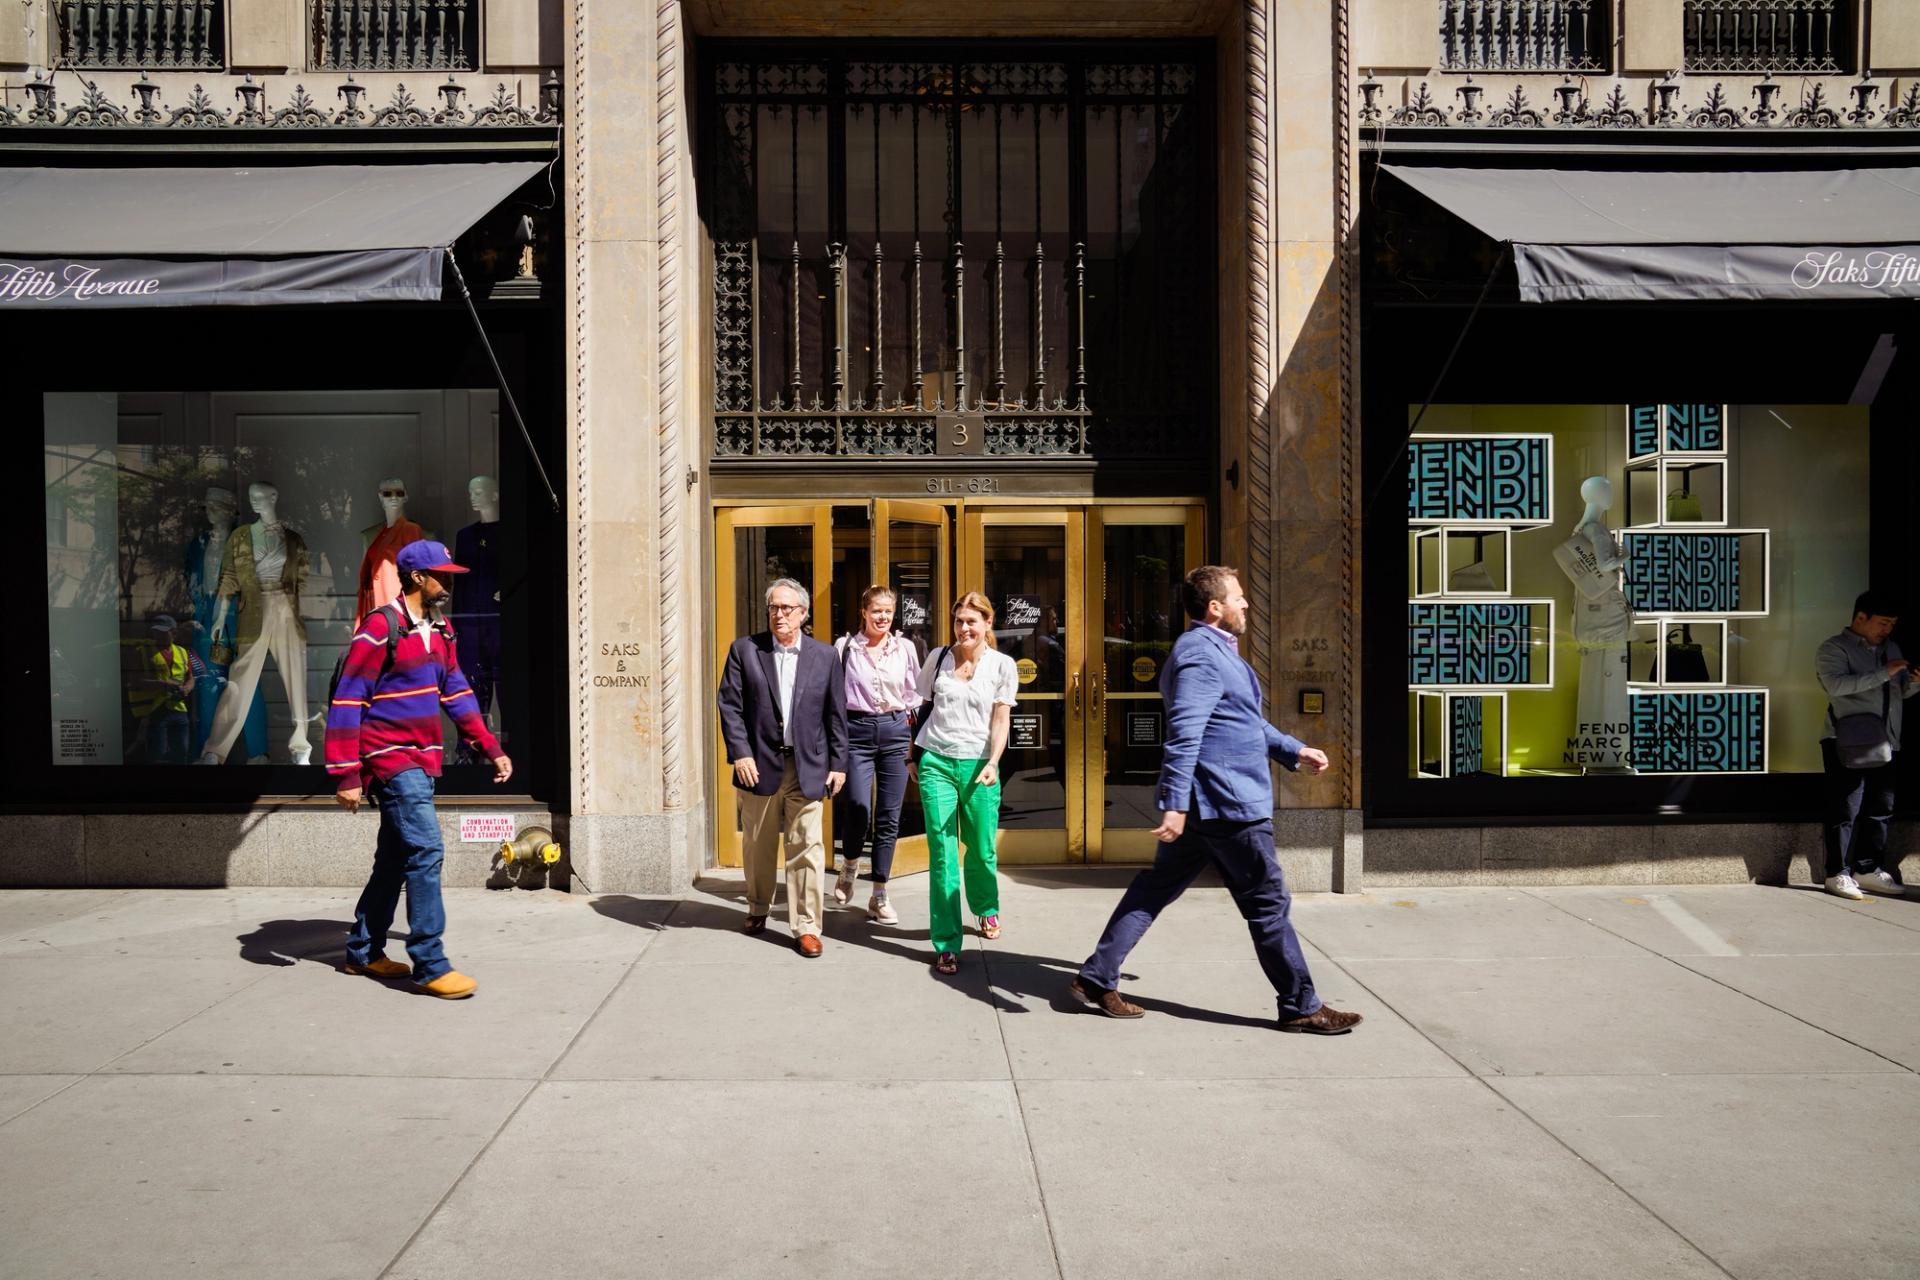 Three people exiting Saks Fifth Avenue in New York City